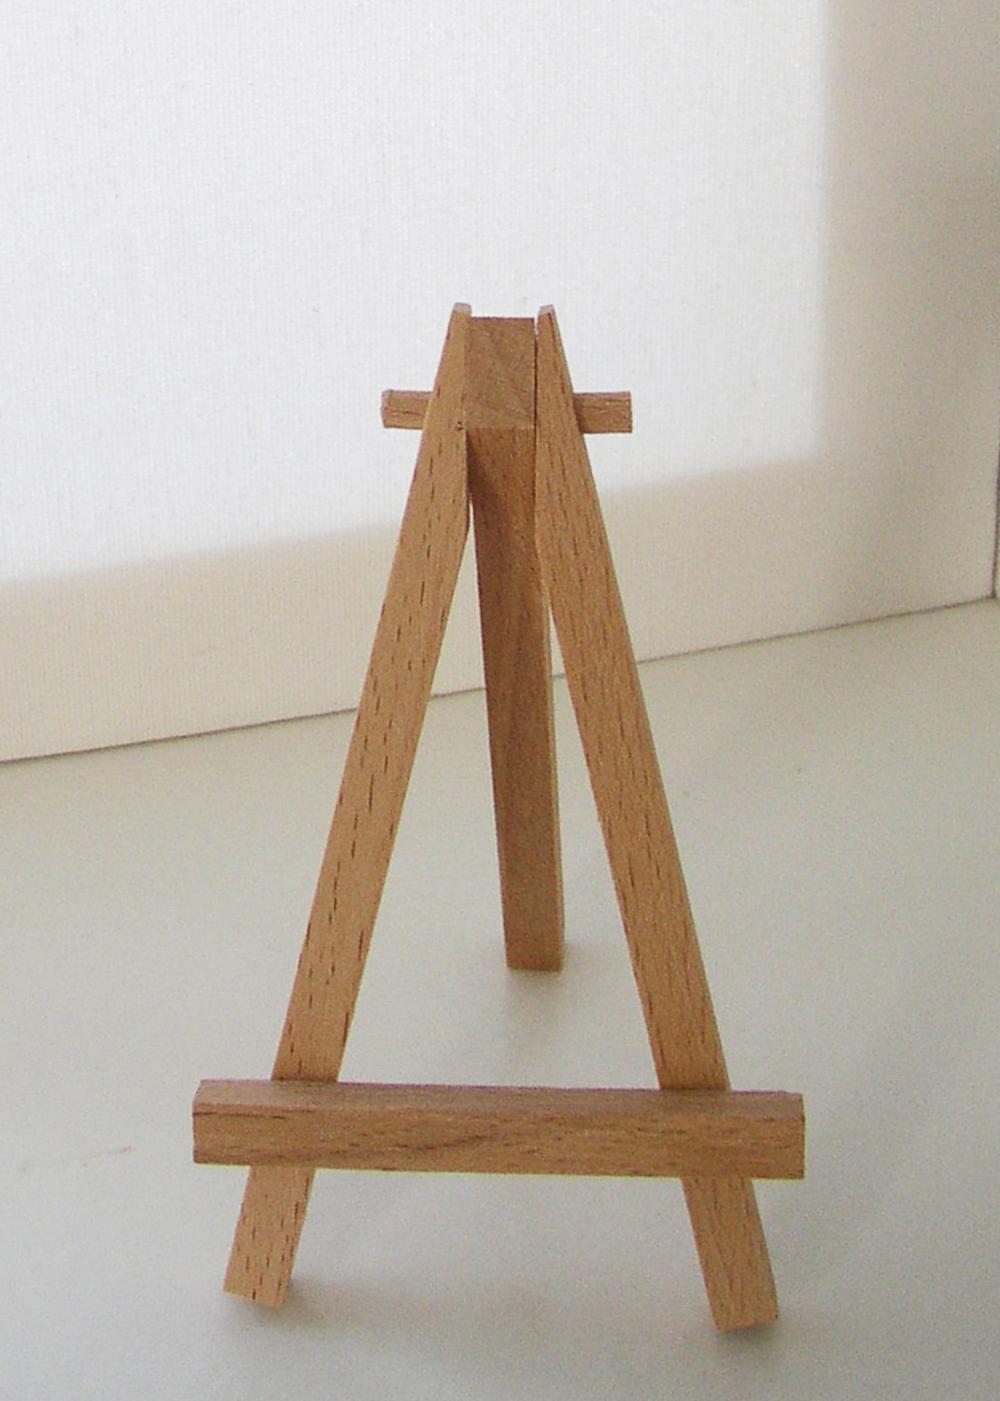 Wooden Display Stand For Mini Artwork. Once Upon A Seaside Garden By Juliebull